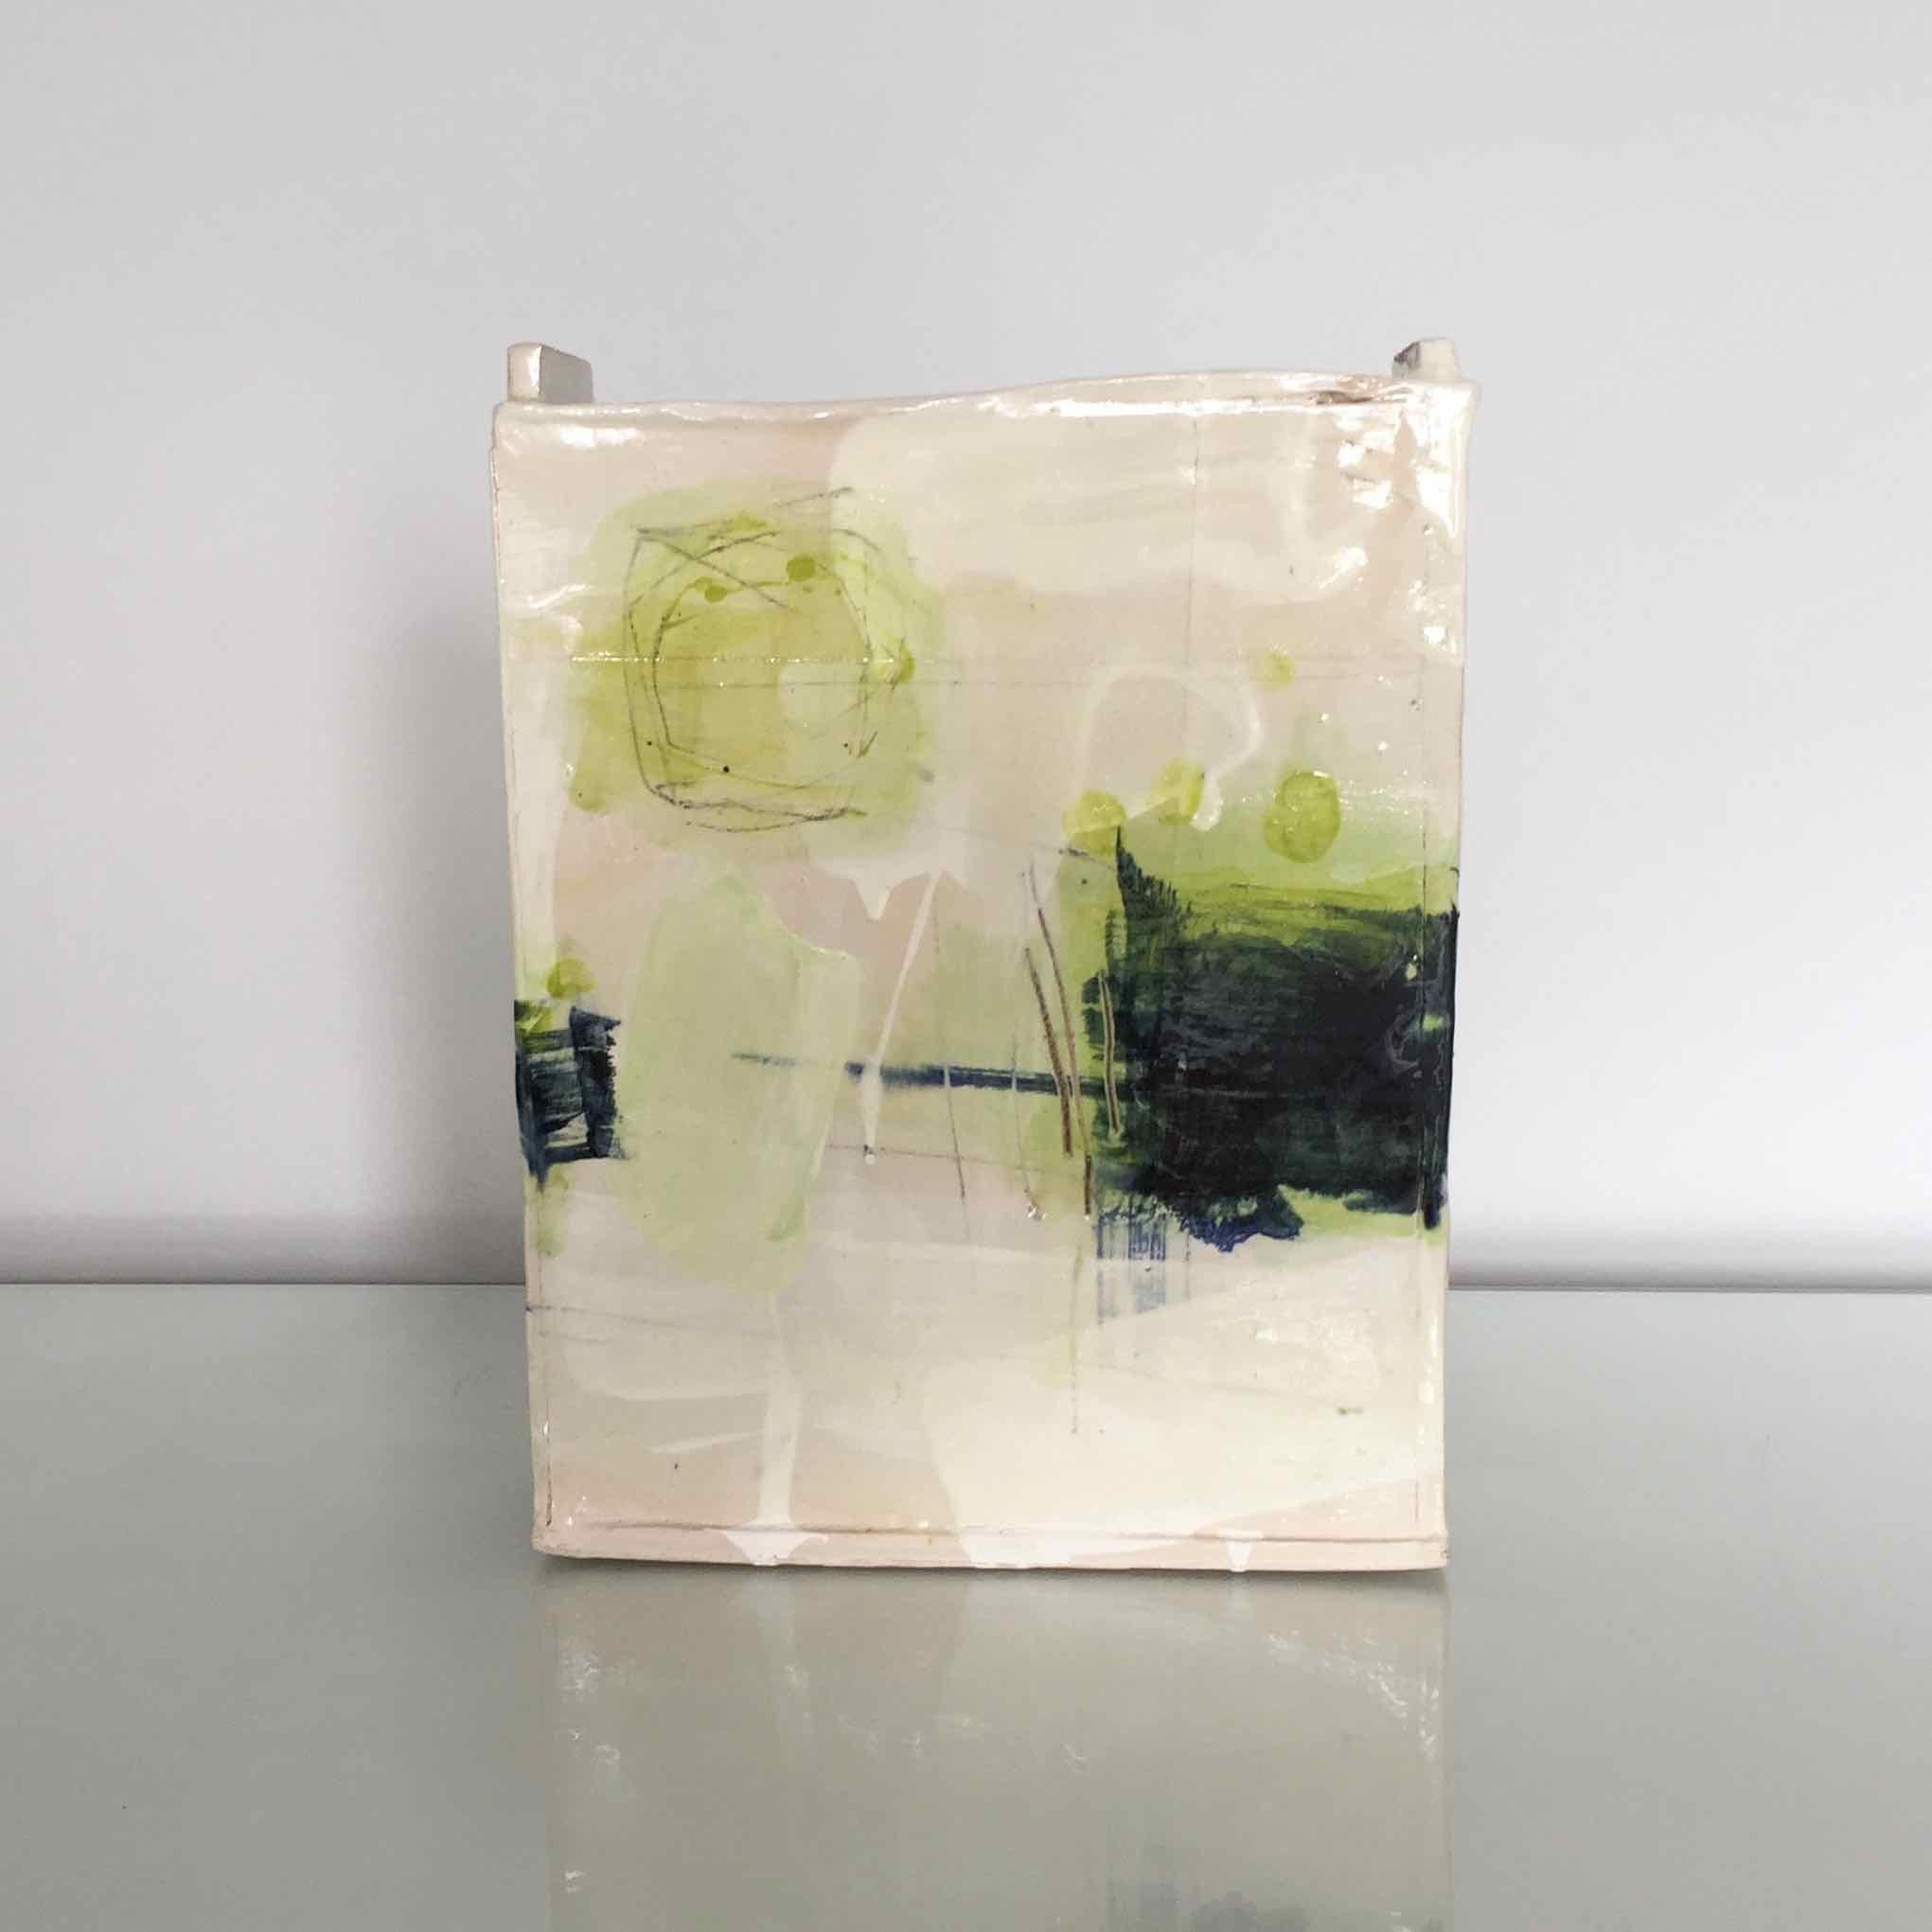 This ceramic vessel is one of Barry’s larger slab works, which are three-dimensional paintings that you can walk around, and view from many angles.

Barry Stedman’s ceramics are influenced by drawings made within the land, exploring relationships